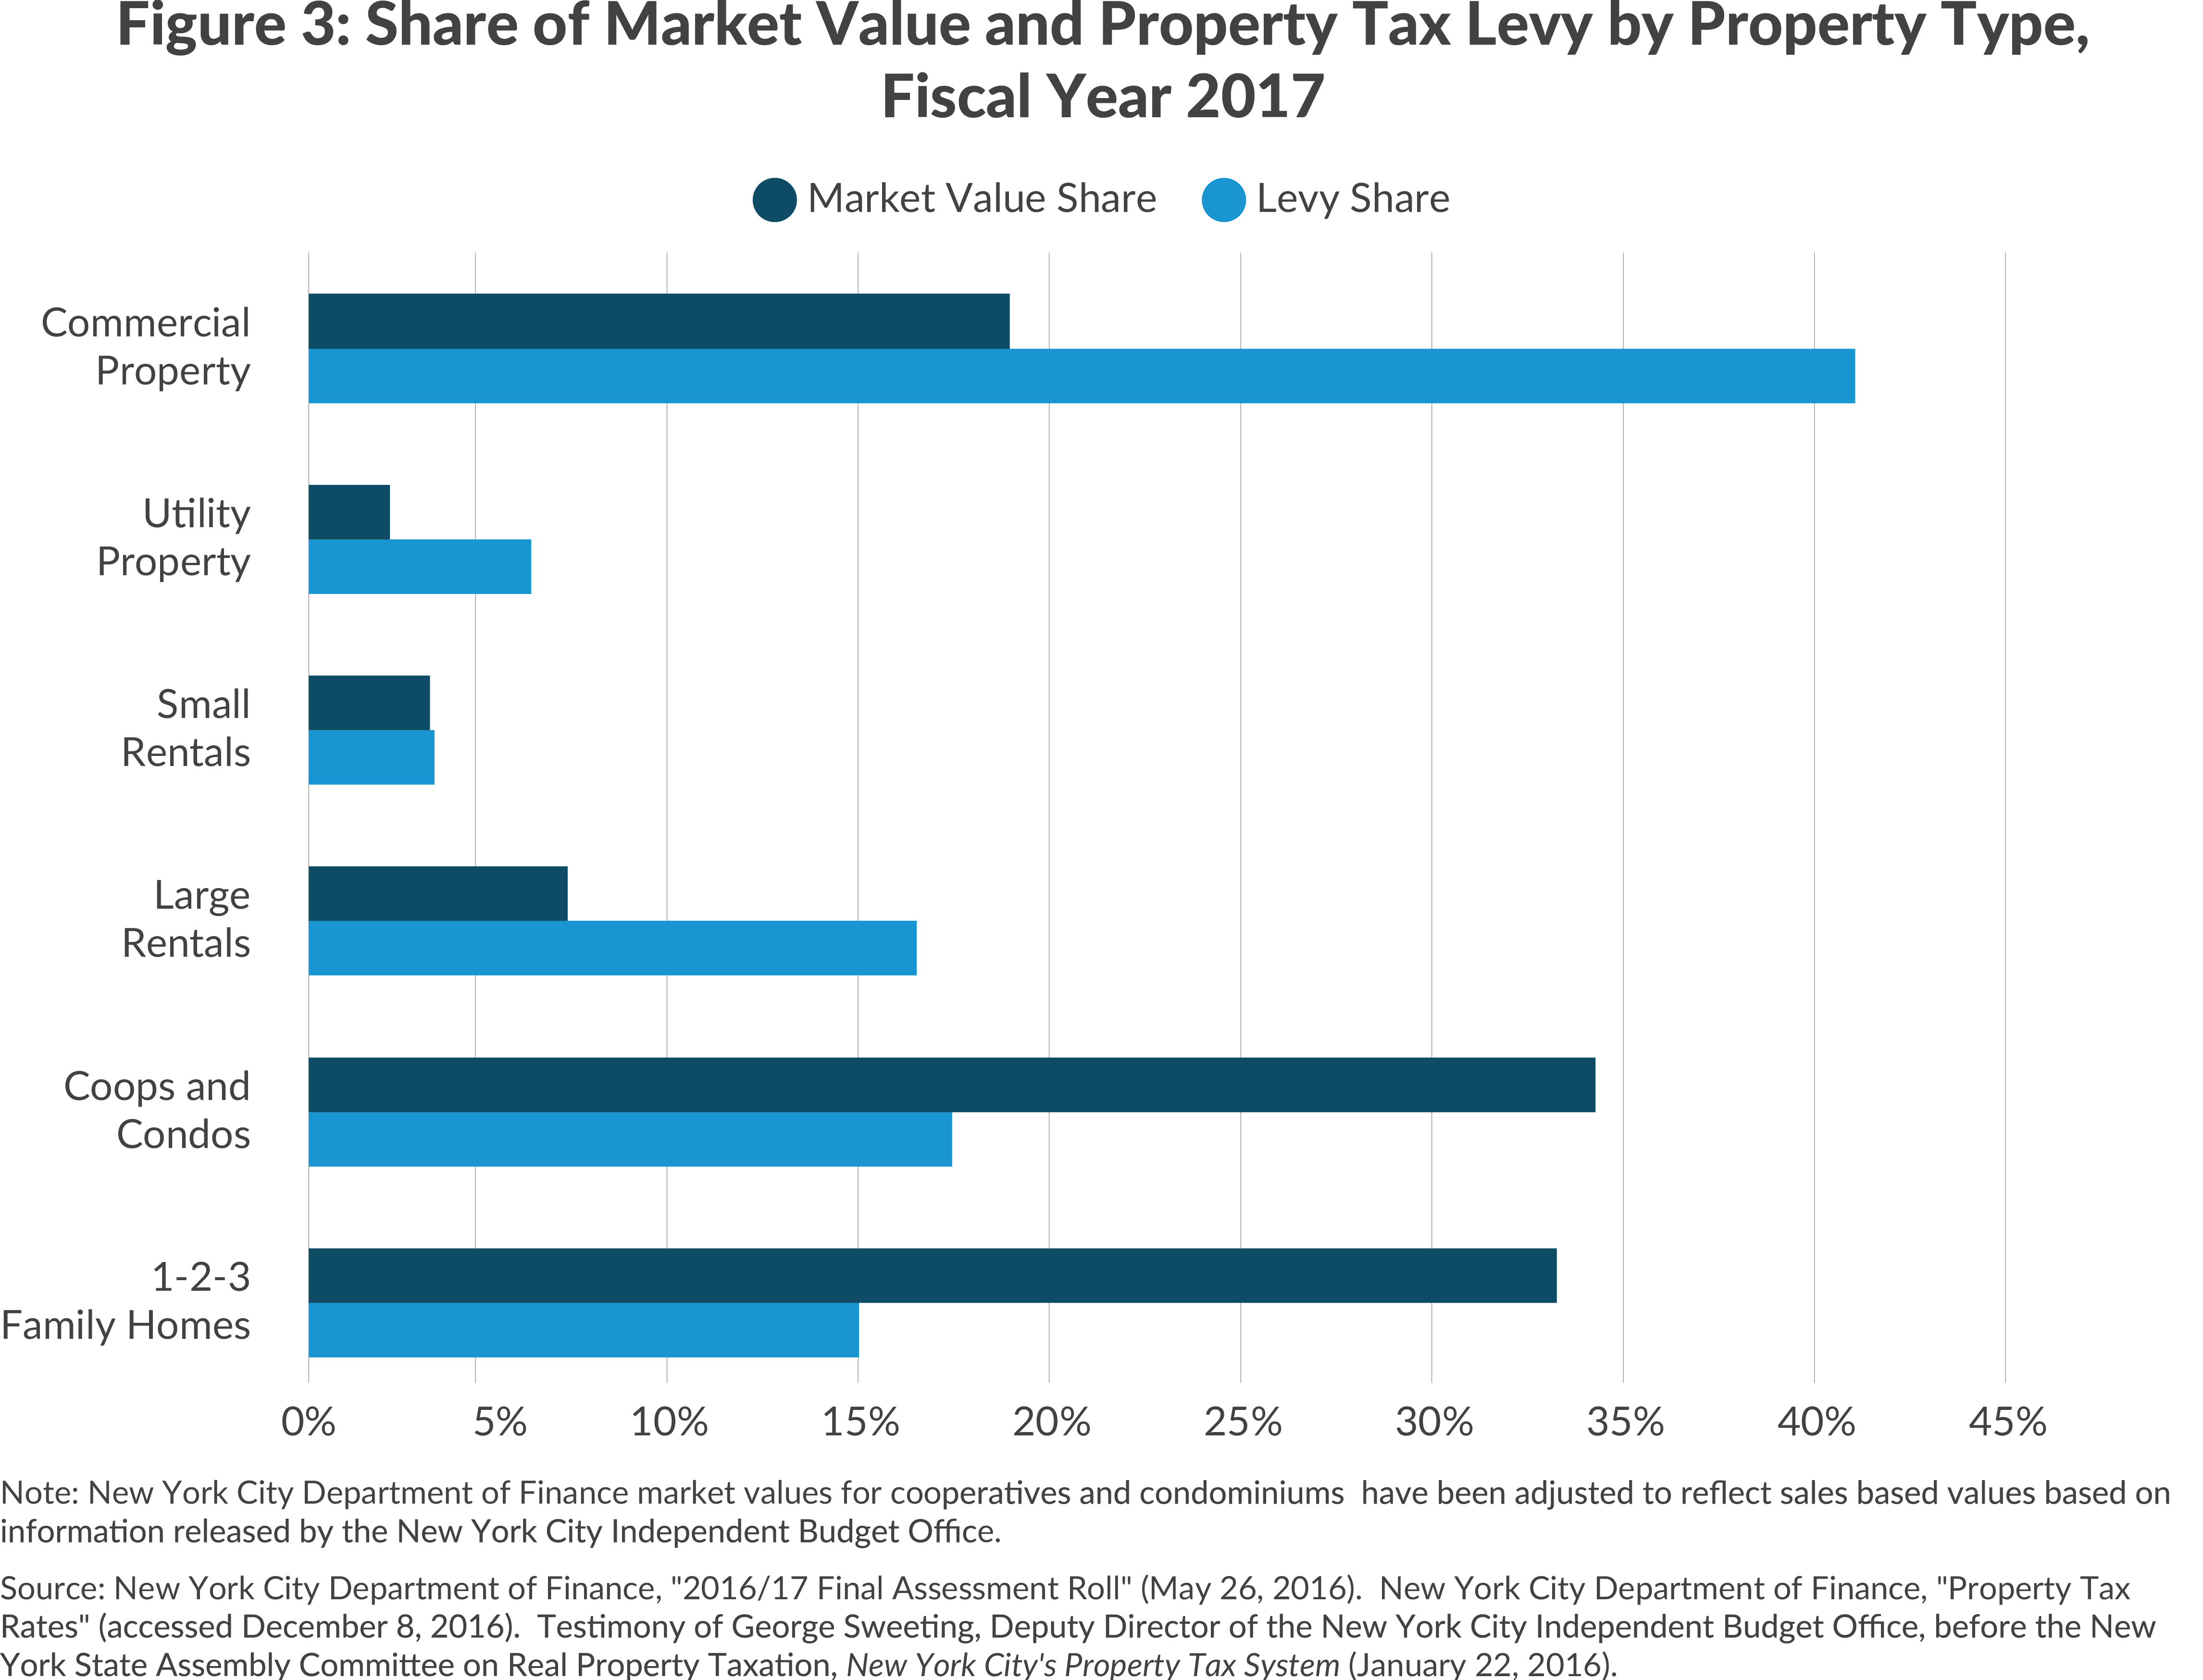 share of levy paid vs share of market value by property type